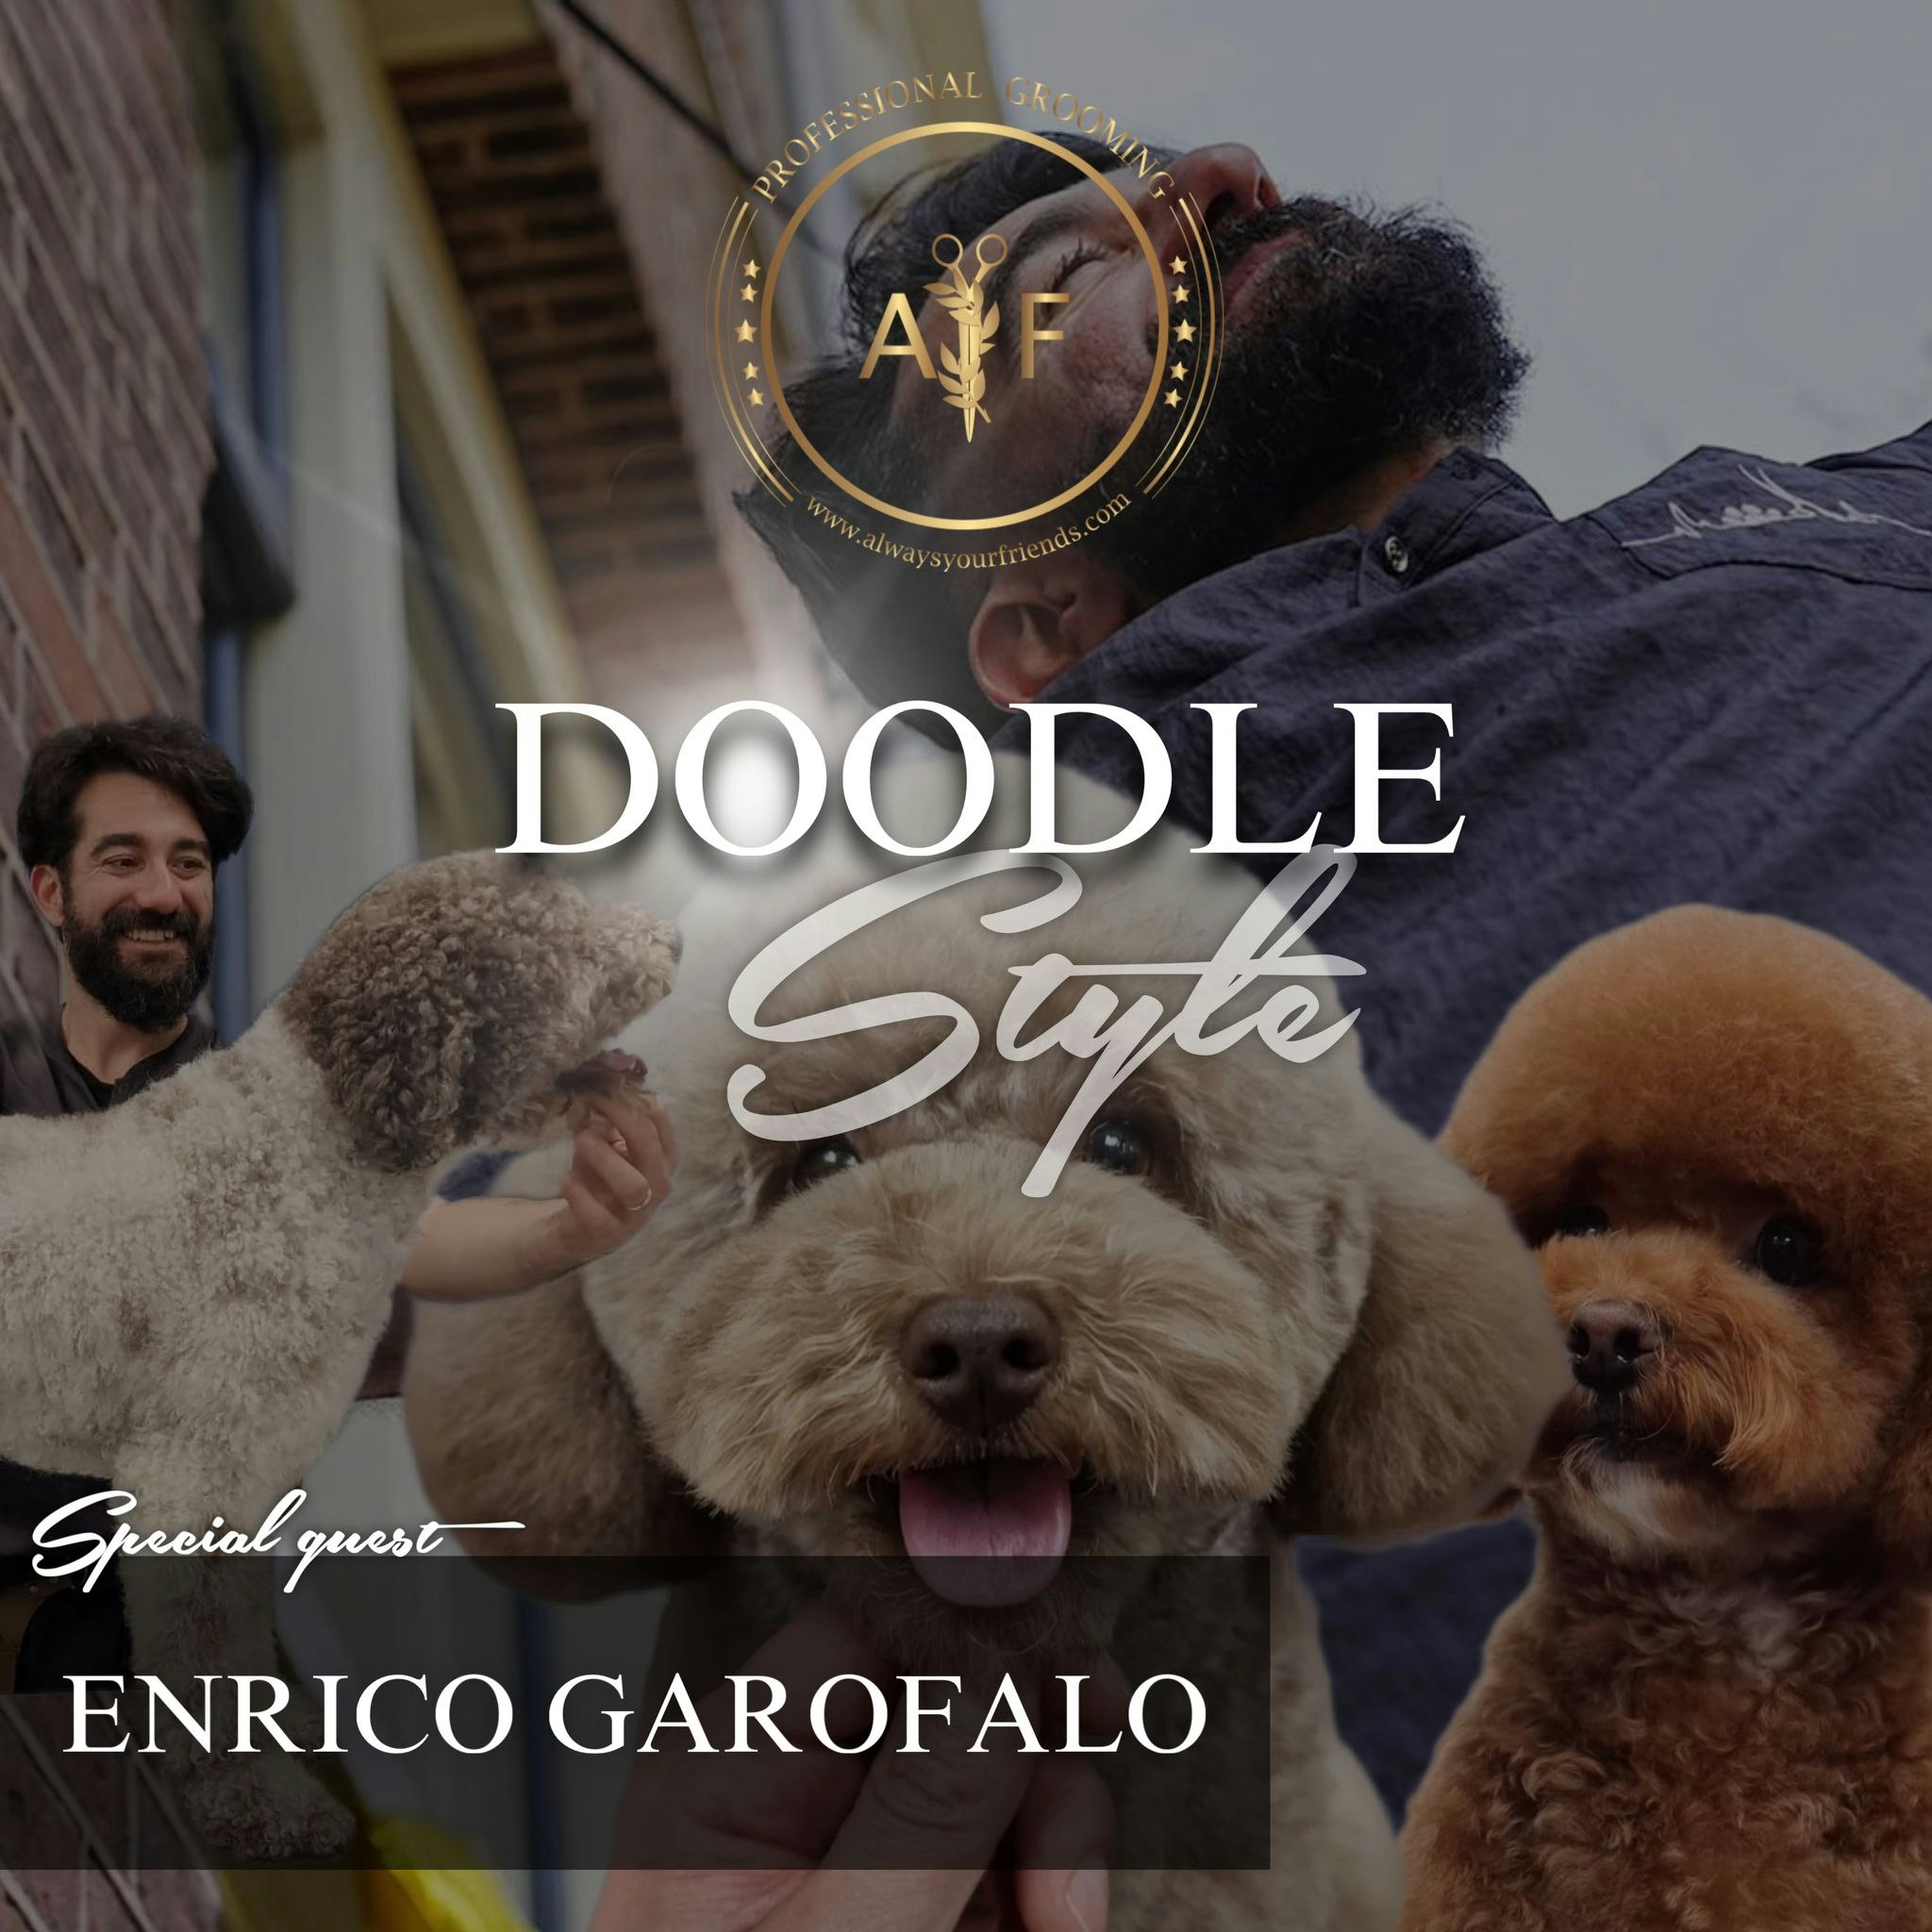 AYF - ACADEMY DOODLE STYLE WITH SPECIAL GUEST ENRICO GAROFALO JUNE 9 AT 12.00